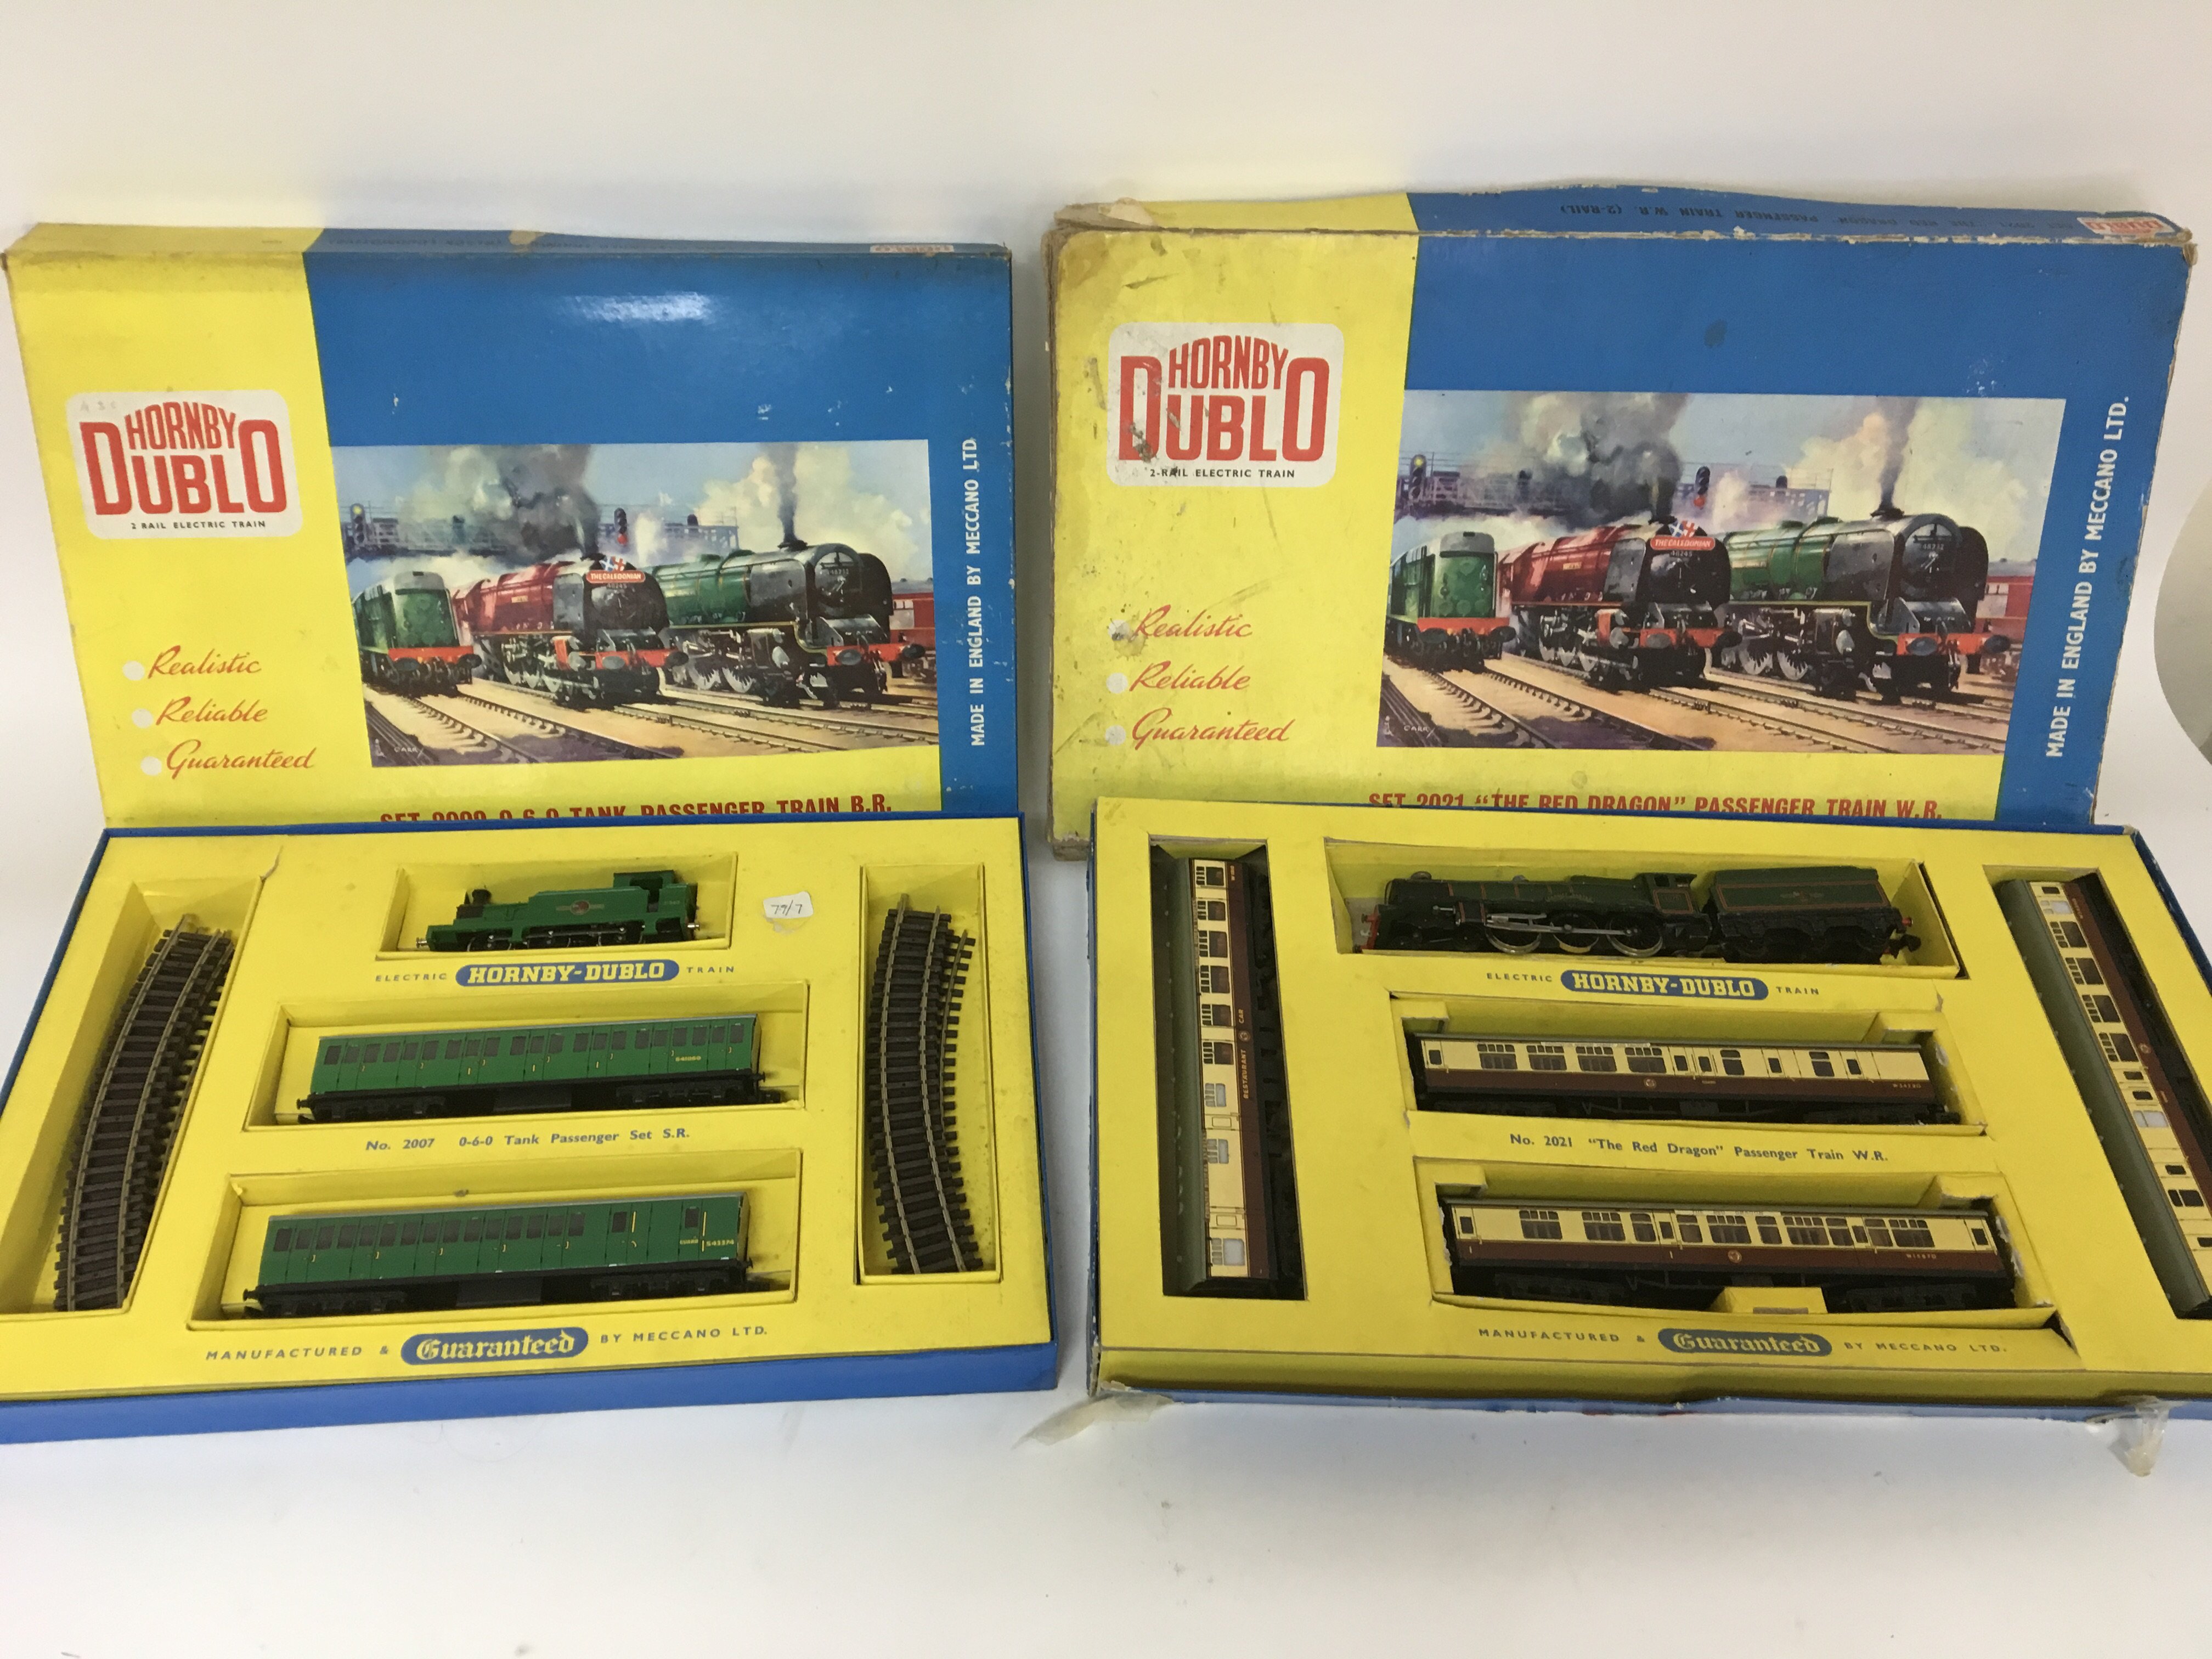 Included are 2 hornby Dublo oo gauge sets.